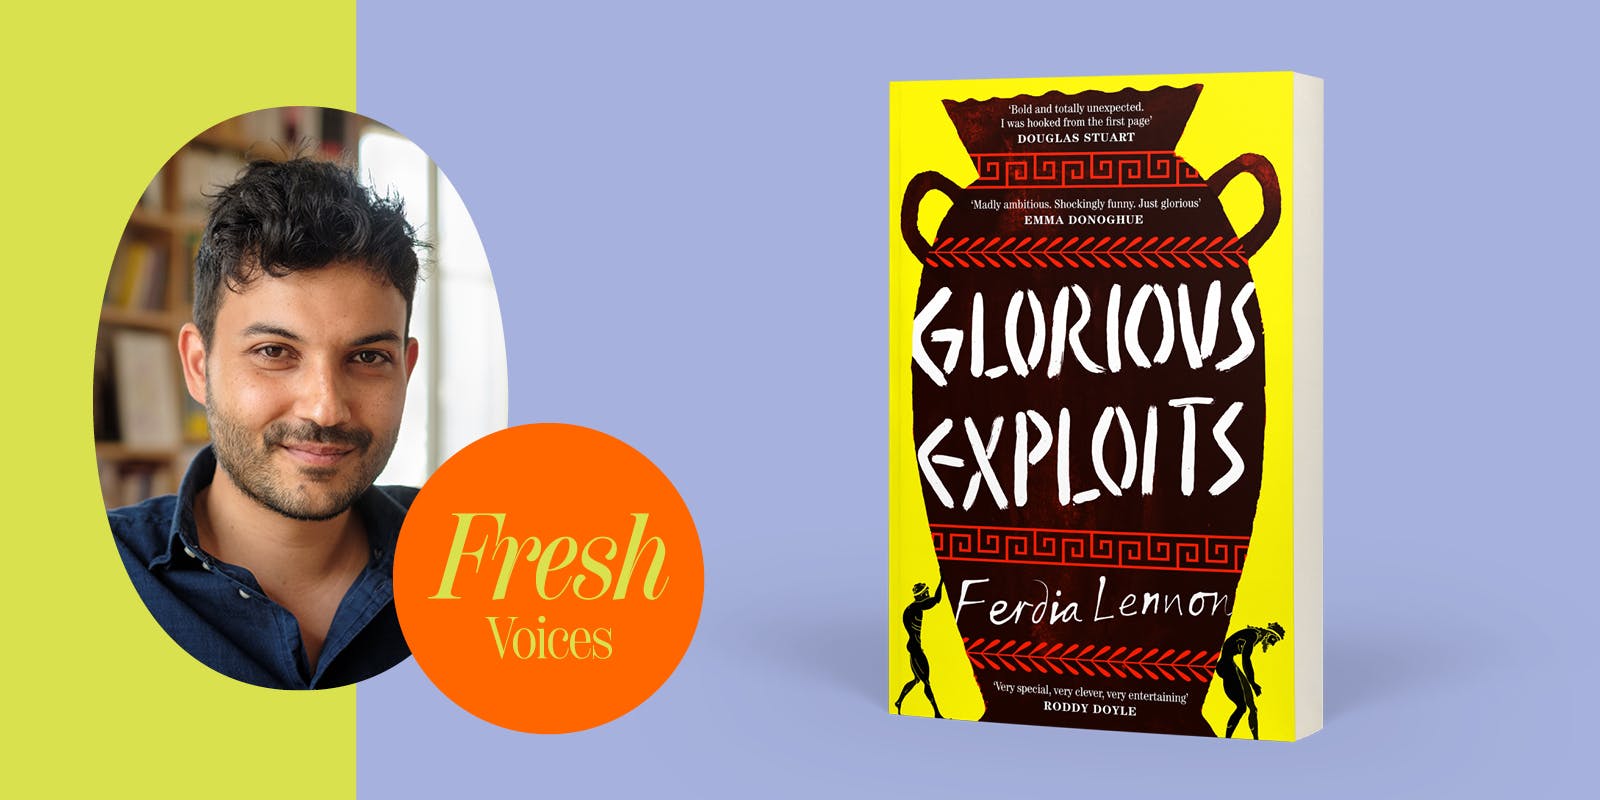 Ferdia Lennon shares the Plutarch passage that inspired Glorious Exploits